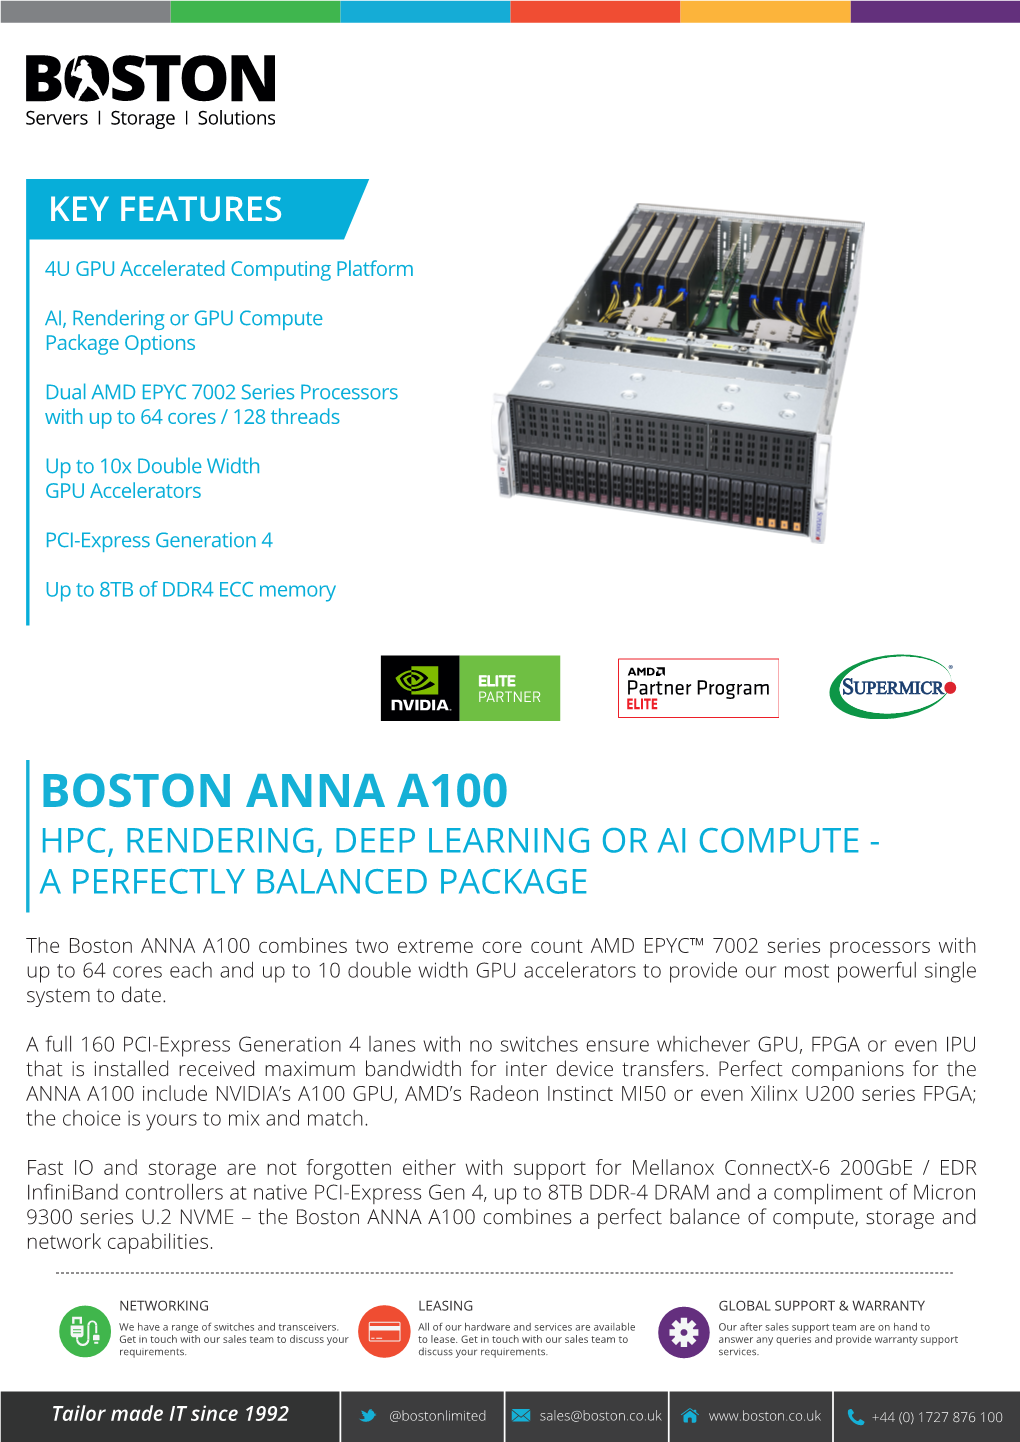 Boston Anna A100 Hpc, Rendering, Deep Learning Or Ai Compute - a Perfectly Balanced Package